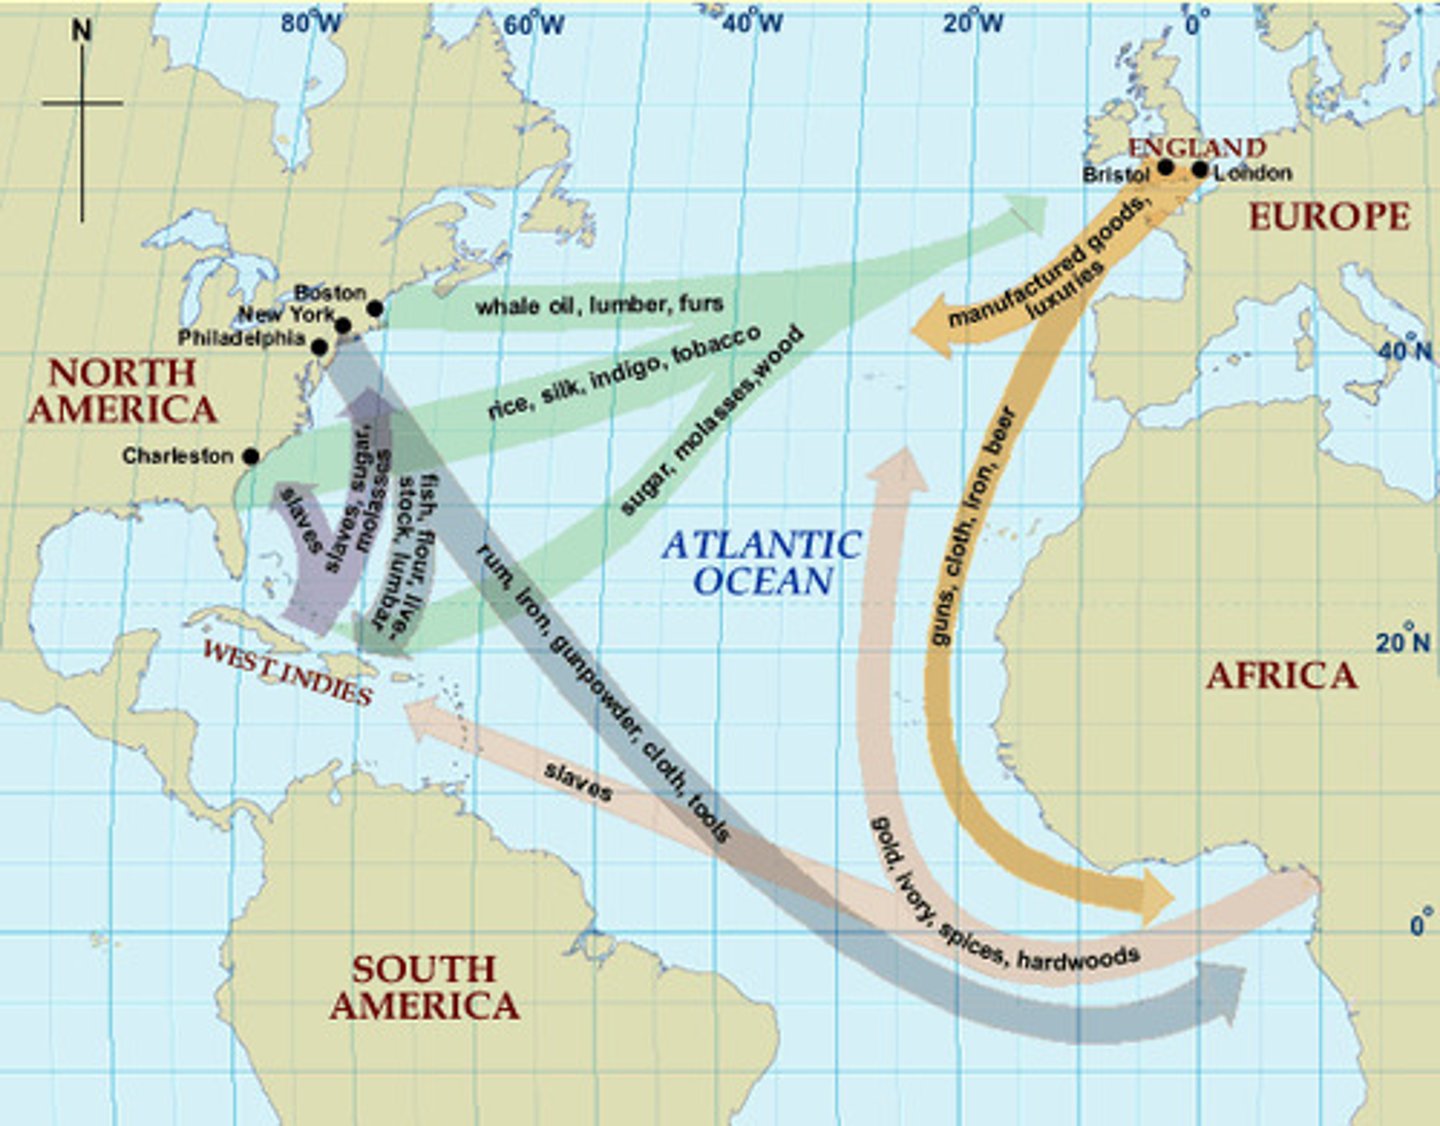 <p>Lasted from 16th century until the 19th century. Trade of African peoples from Western Africa to the Americas. One part of a three-part economical system known as the Middle Passage of the Triangular Trade.</p>